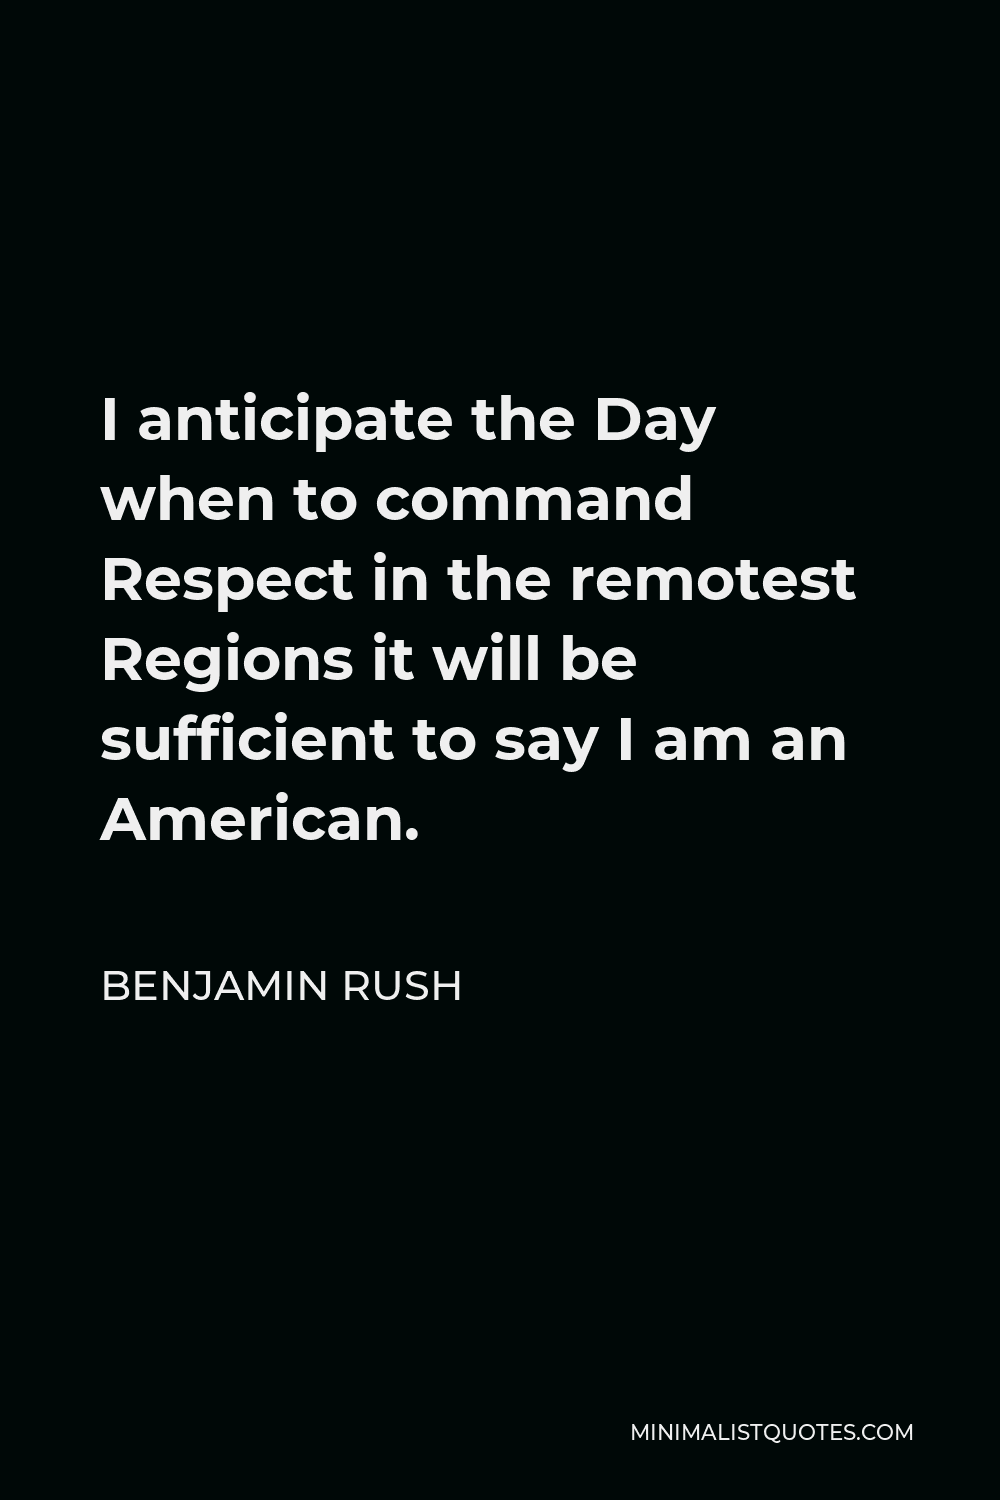 Benjamin Rush Quote - I anticipate the Day when to command Respect in the remotest Regions it will be sufficient to say I am an American.